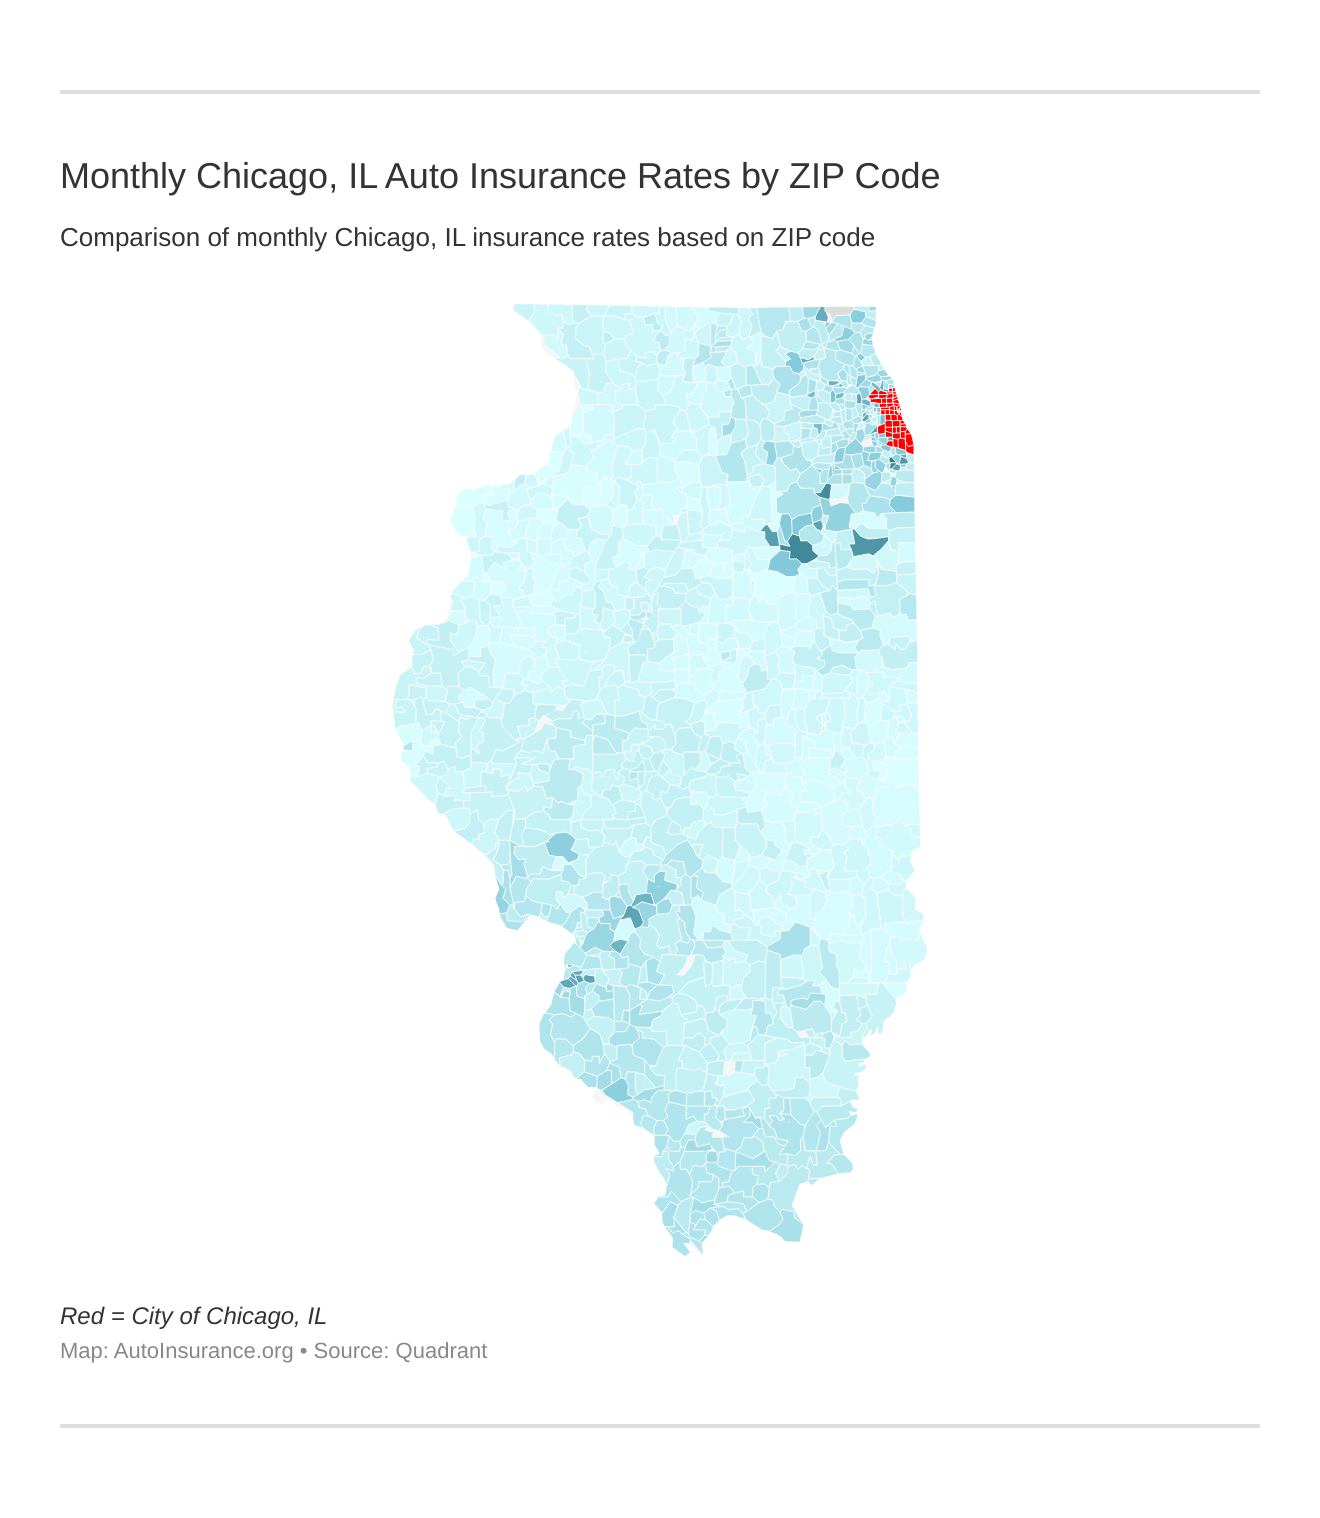 Monthly Chicago, IL Auto Insurance Rates by ZIP Code